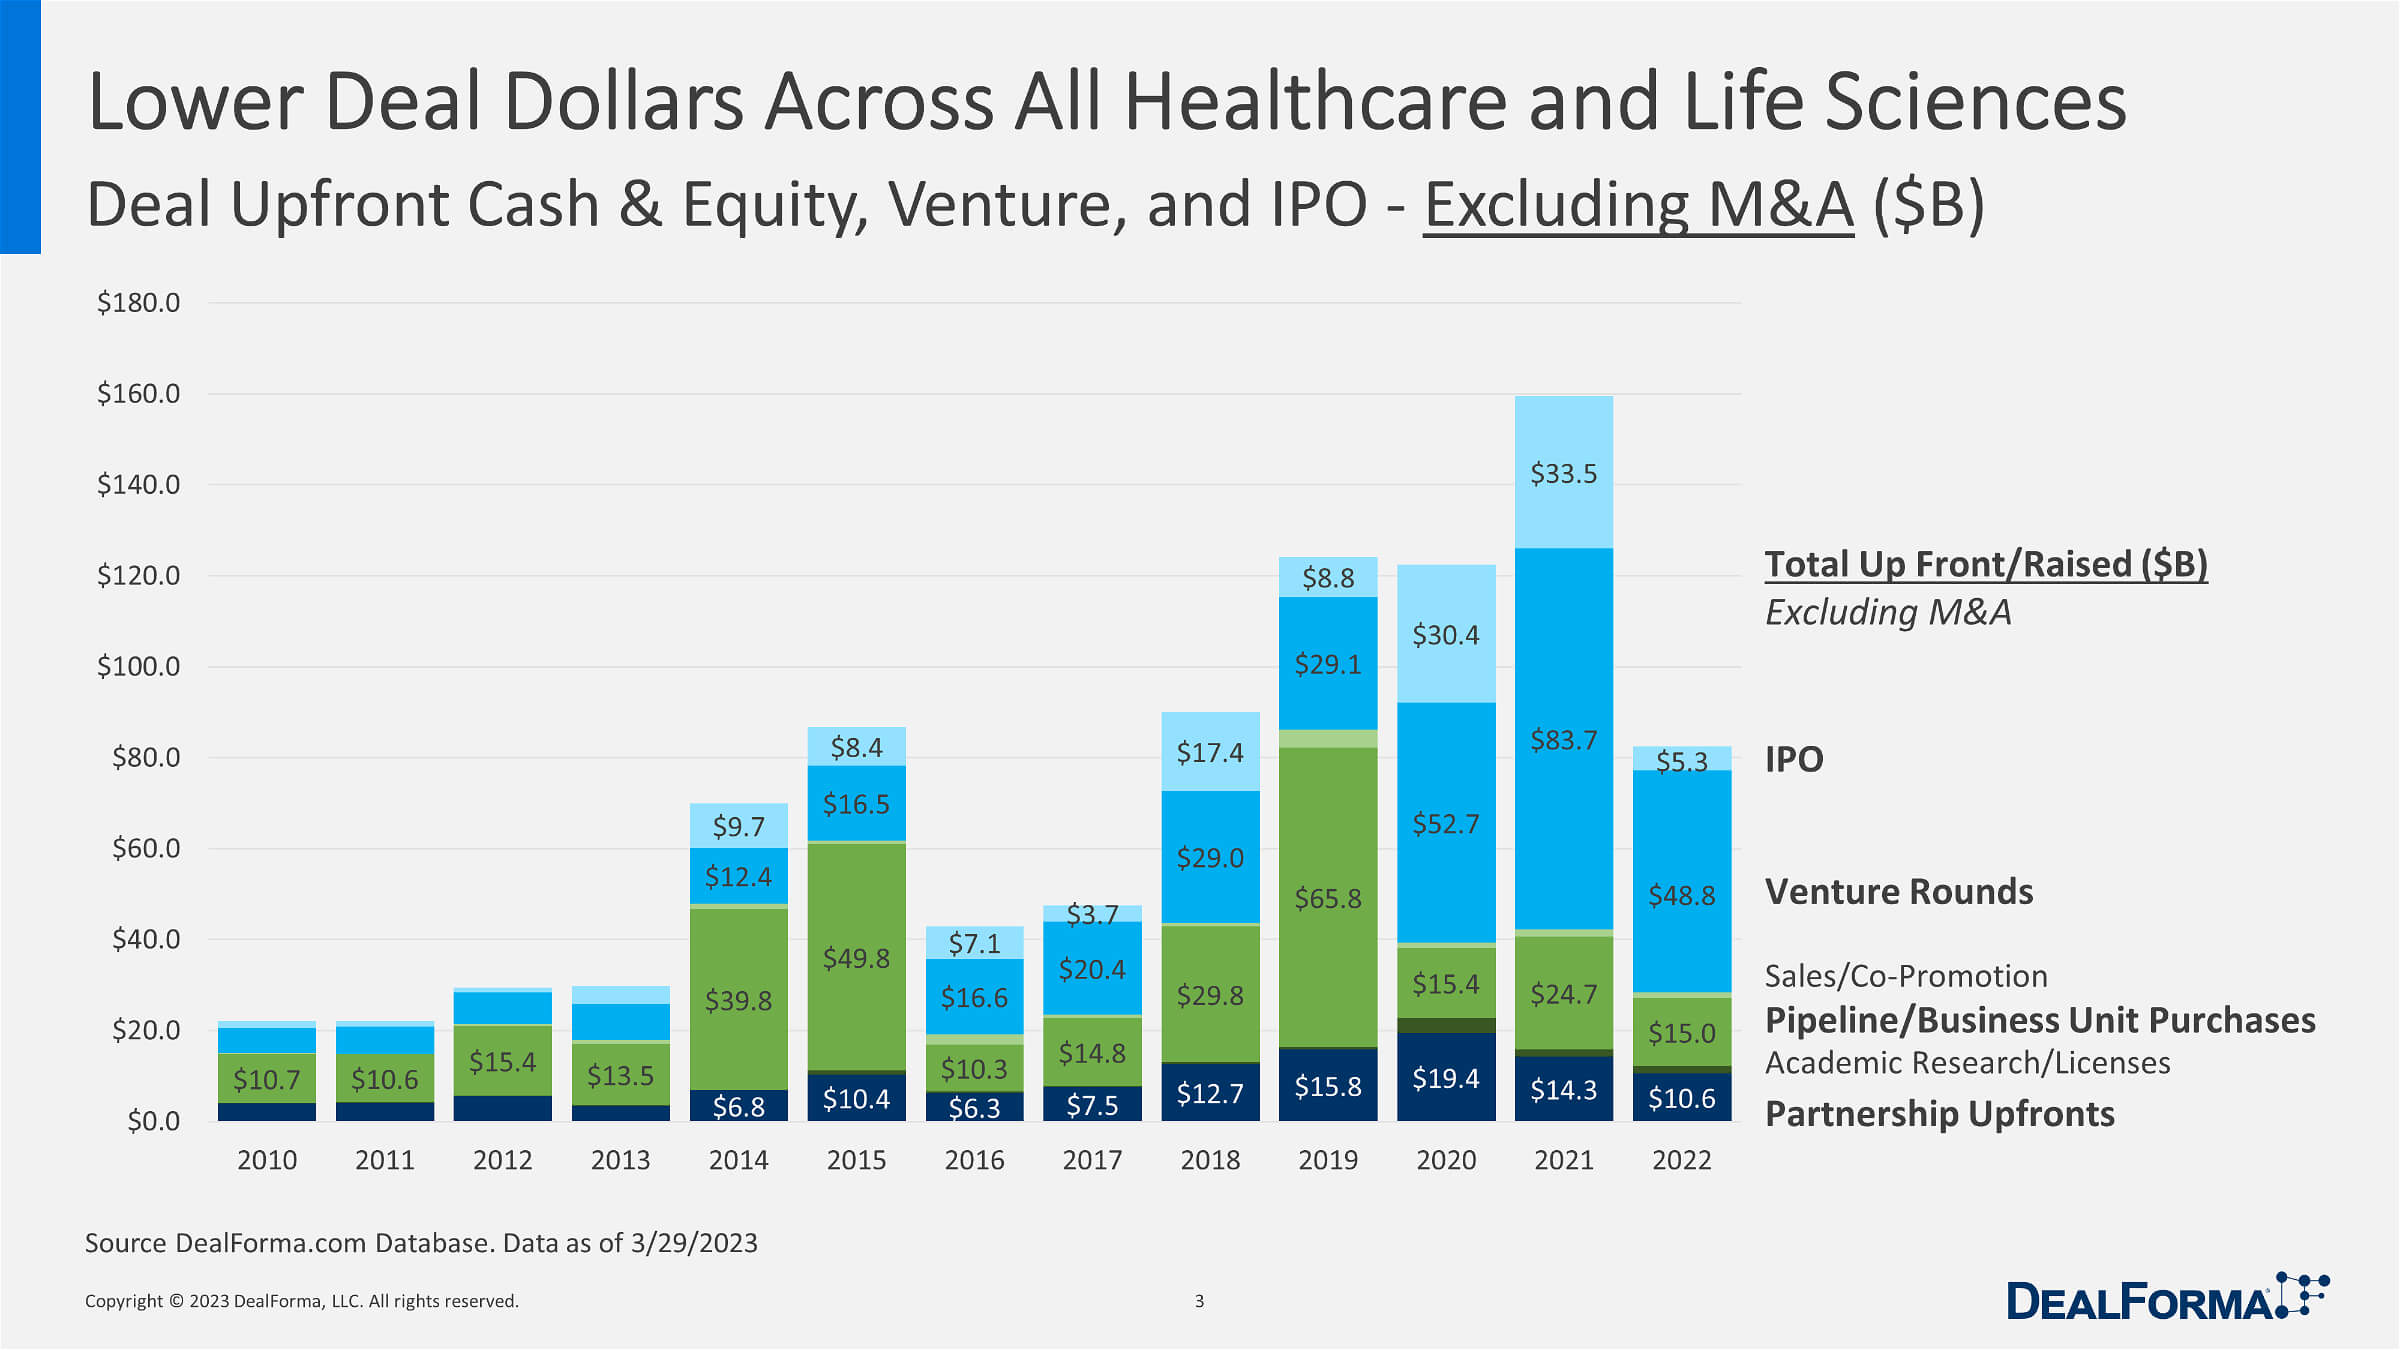 Lower Deal Dollars Across All Healthcare and Life Sciences